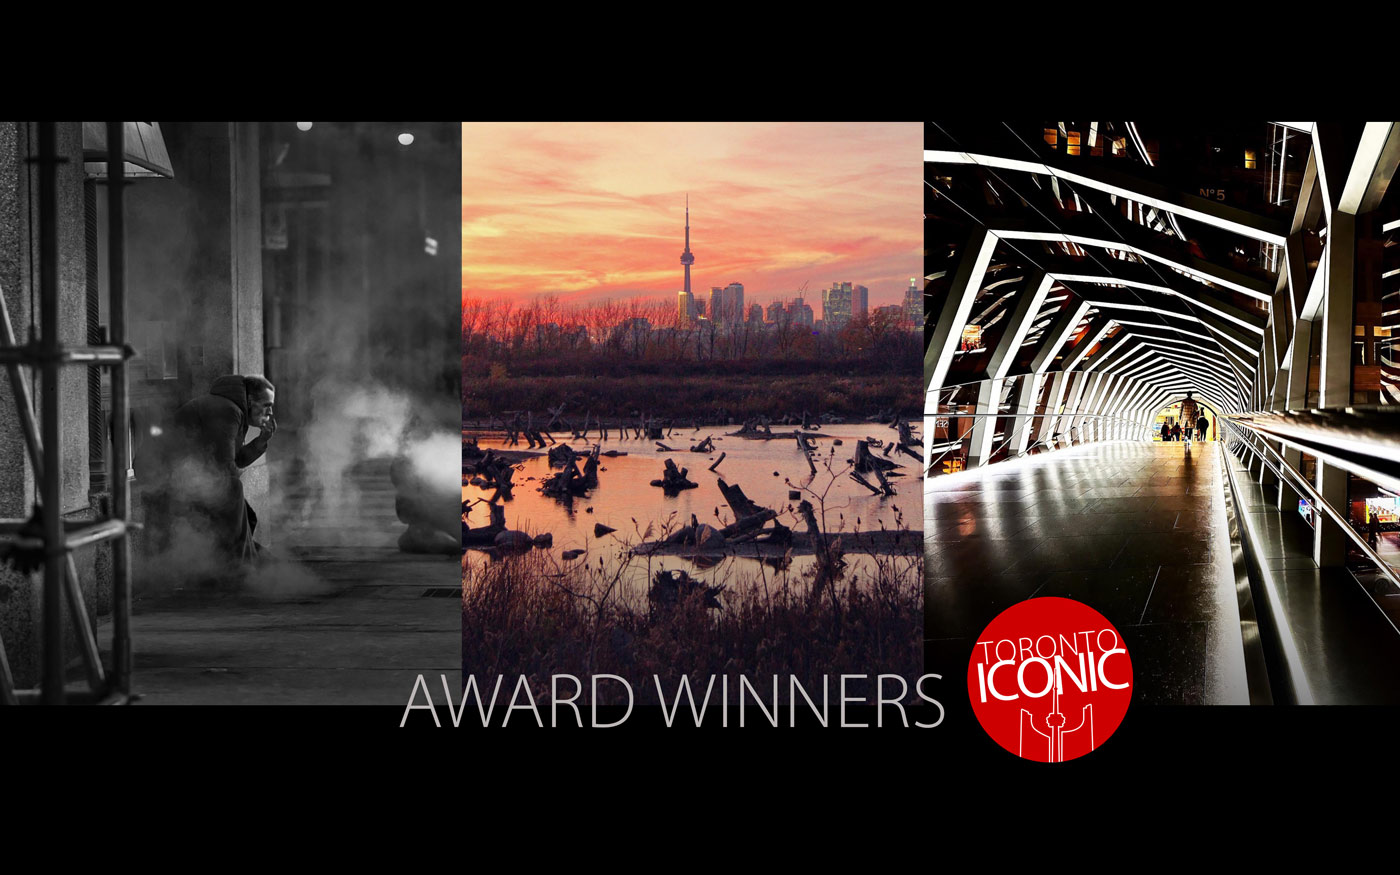 Announcing the Winners of our Iconic Toronto Photo Contest 2022